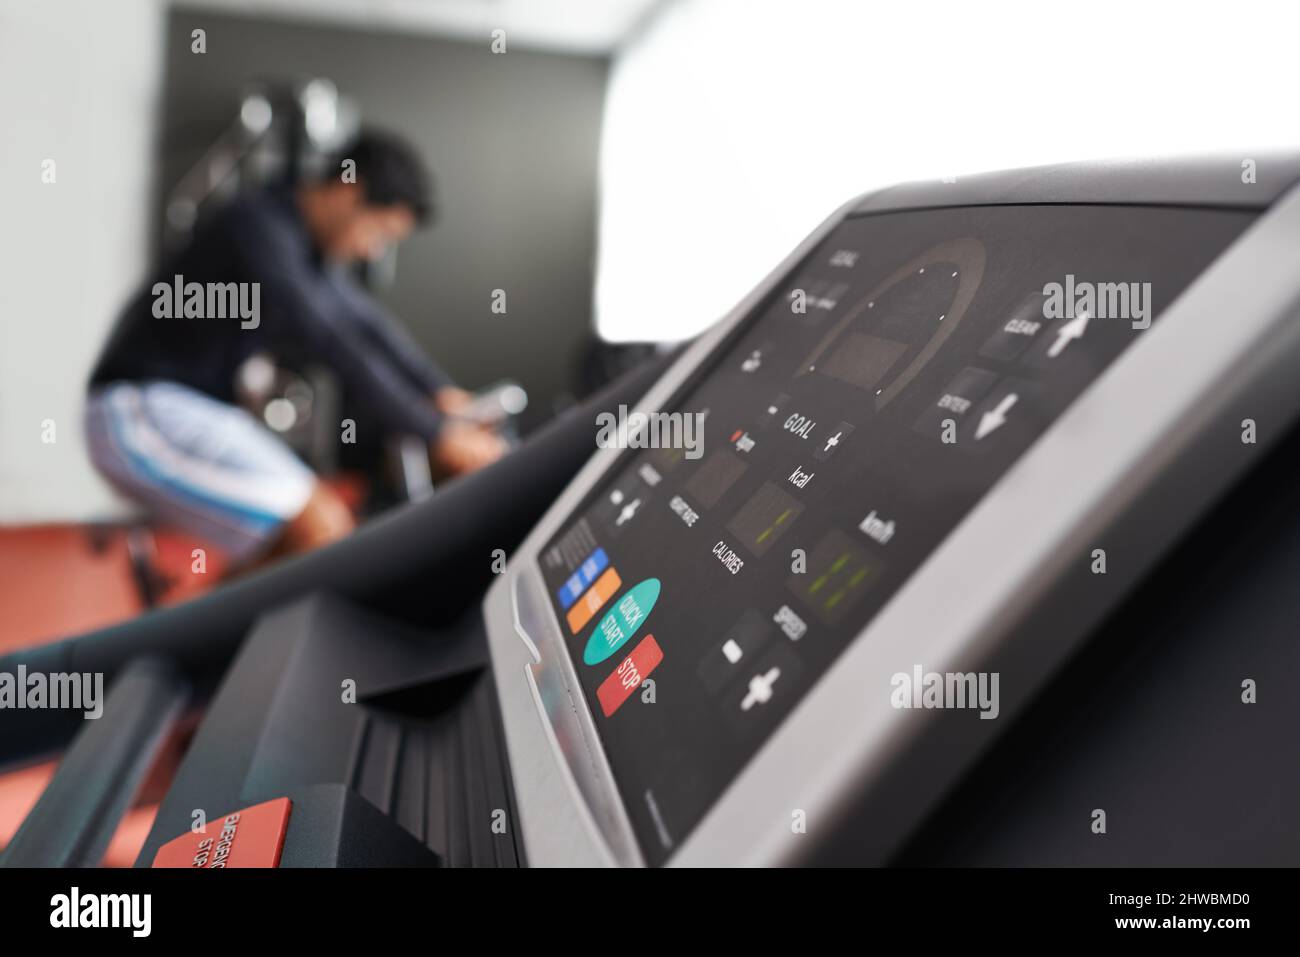 Recording your heart rate. Shot of a cardio equipment at a gym. Stock Photo